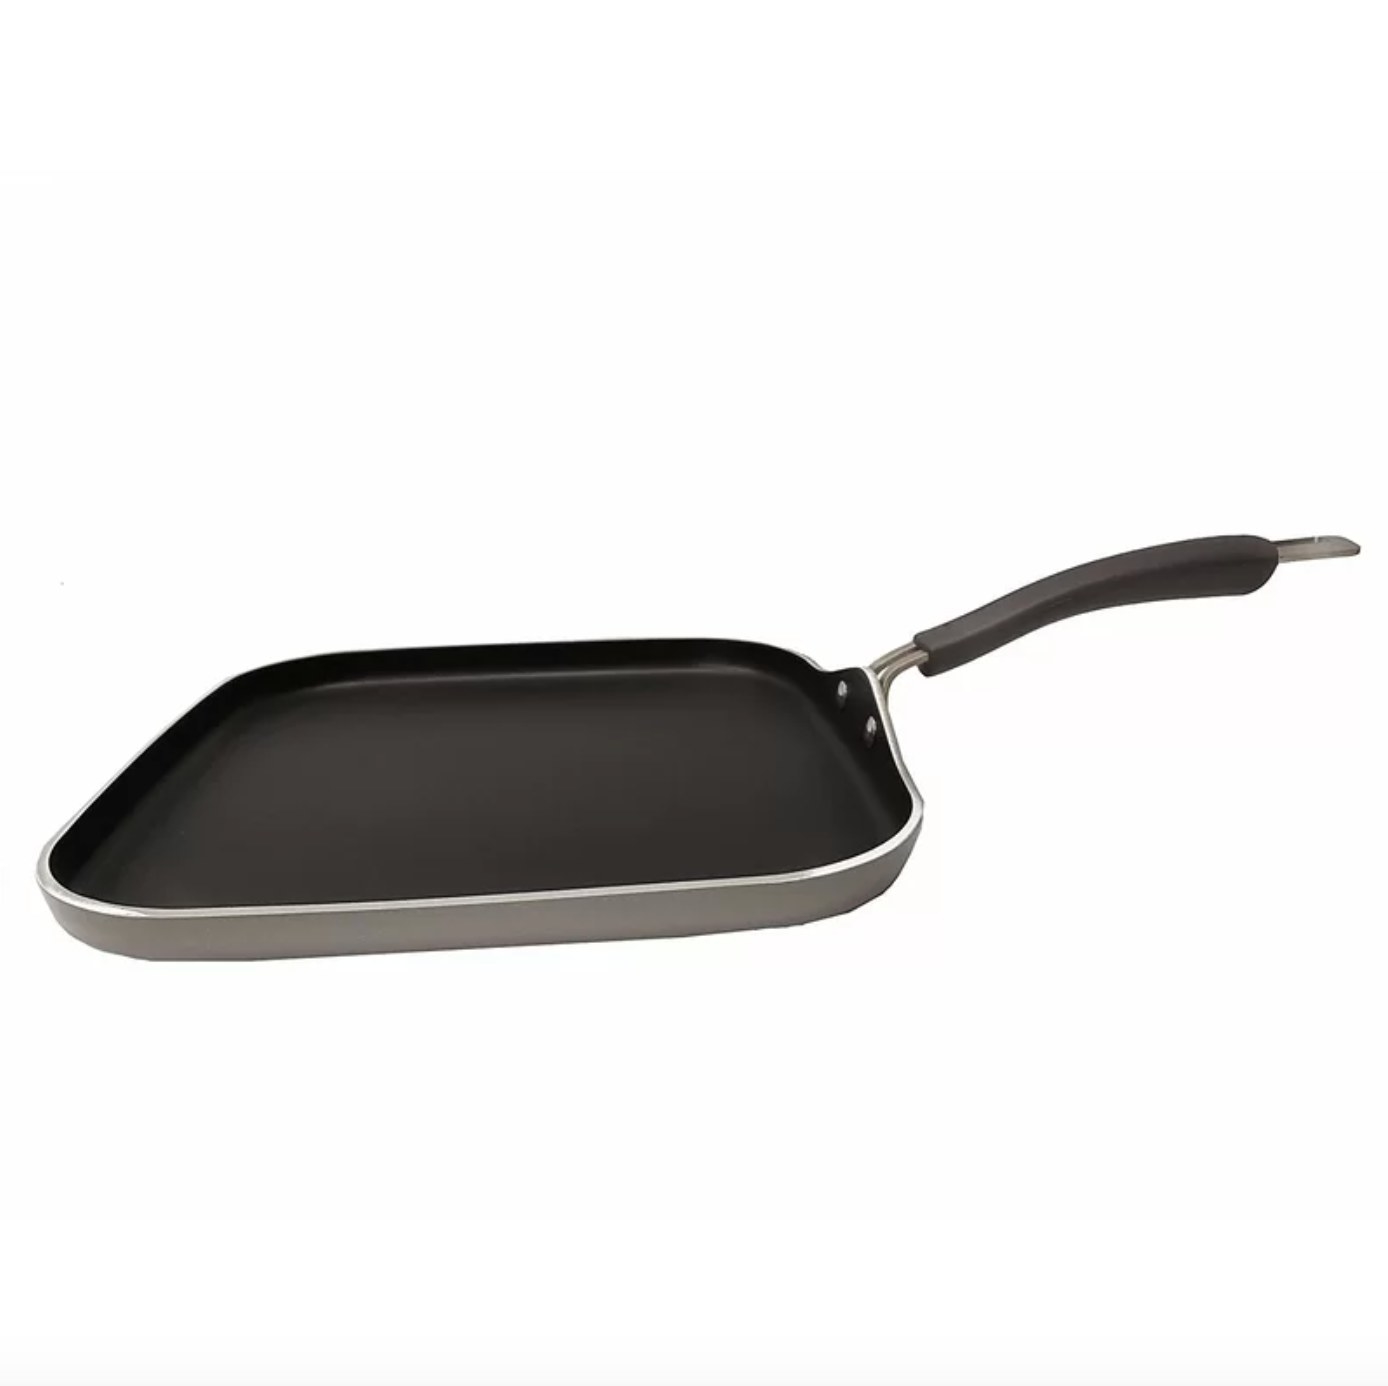 The griddle in gray and black